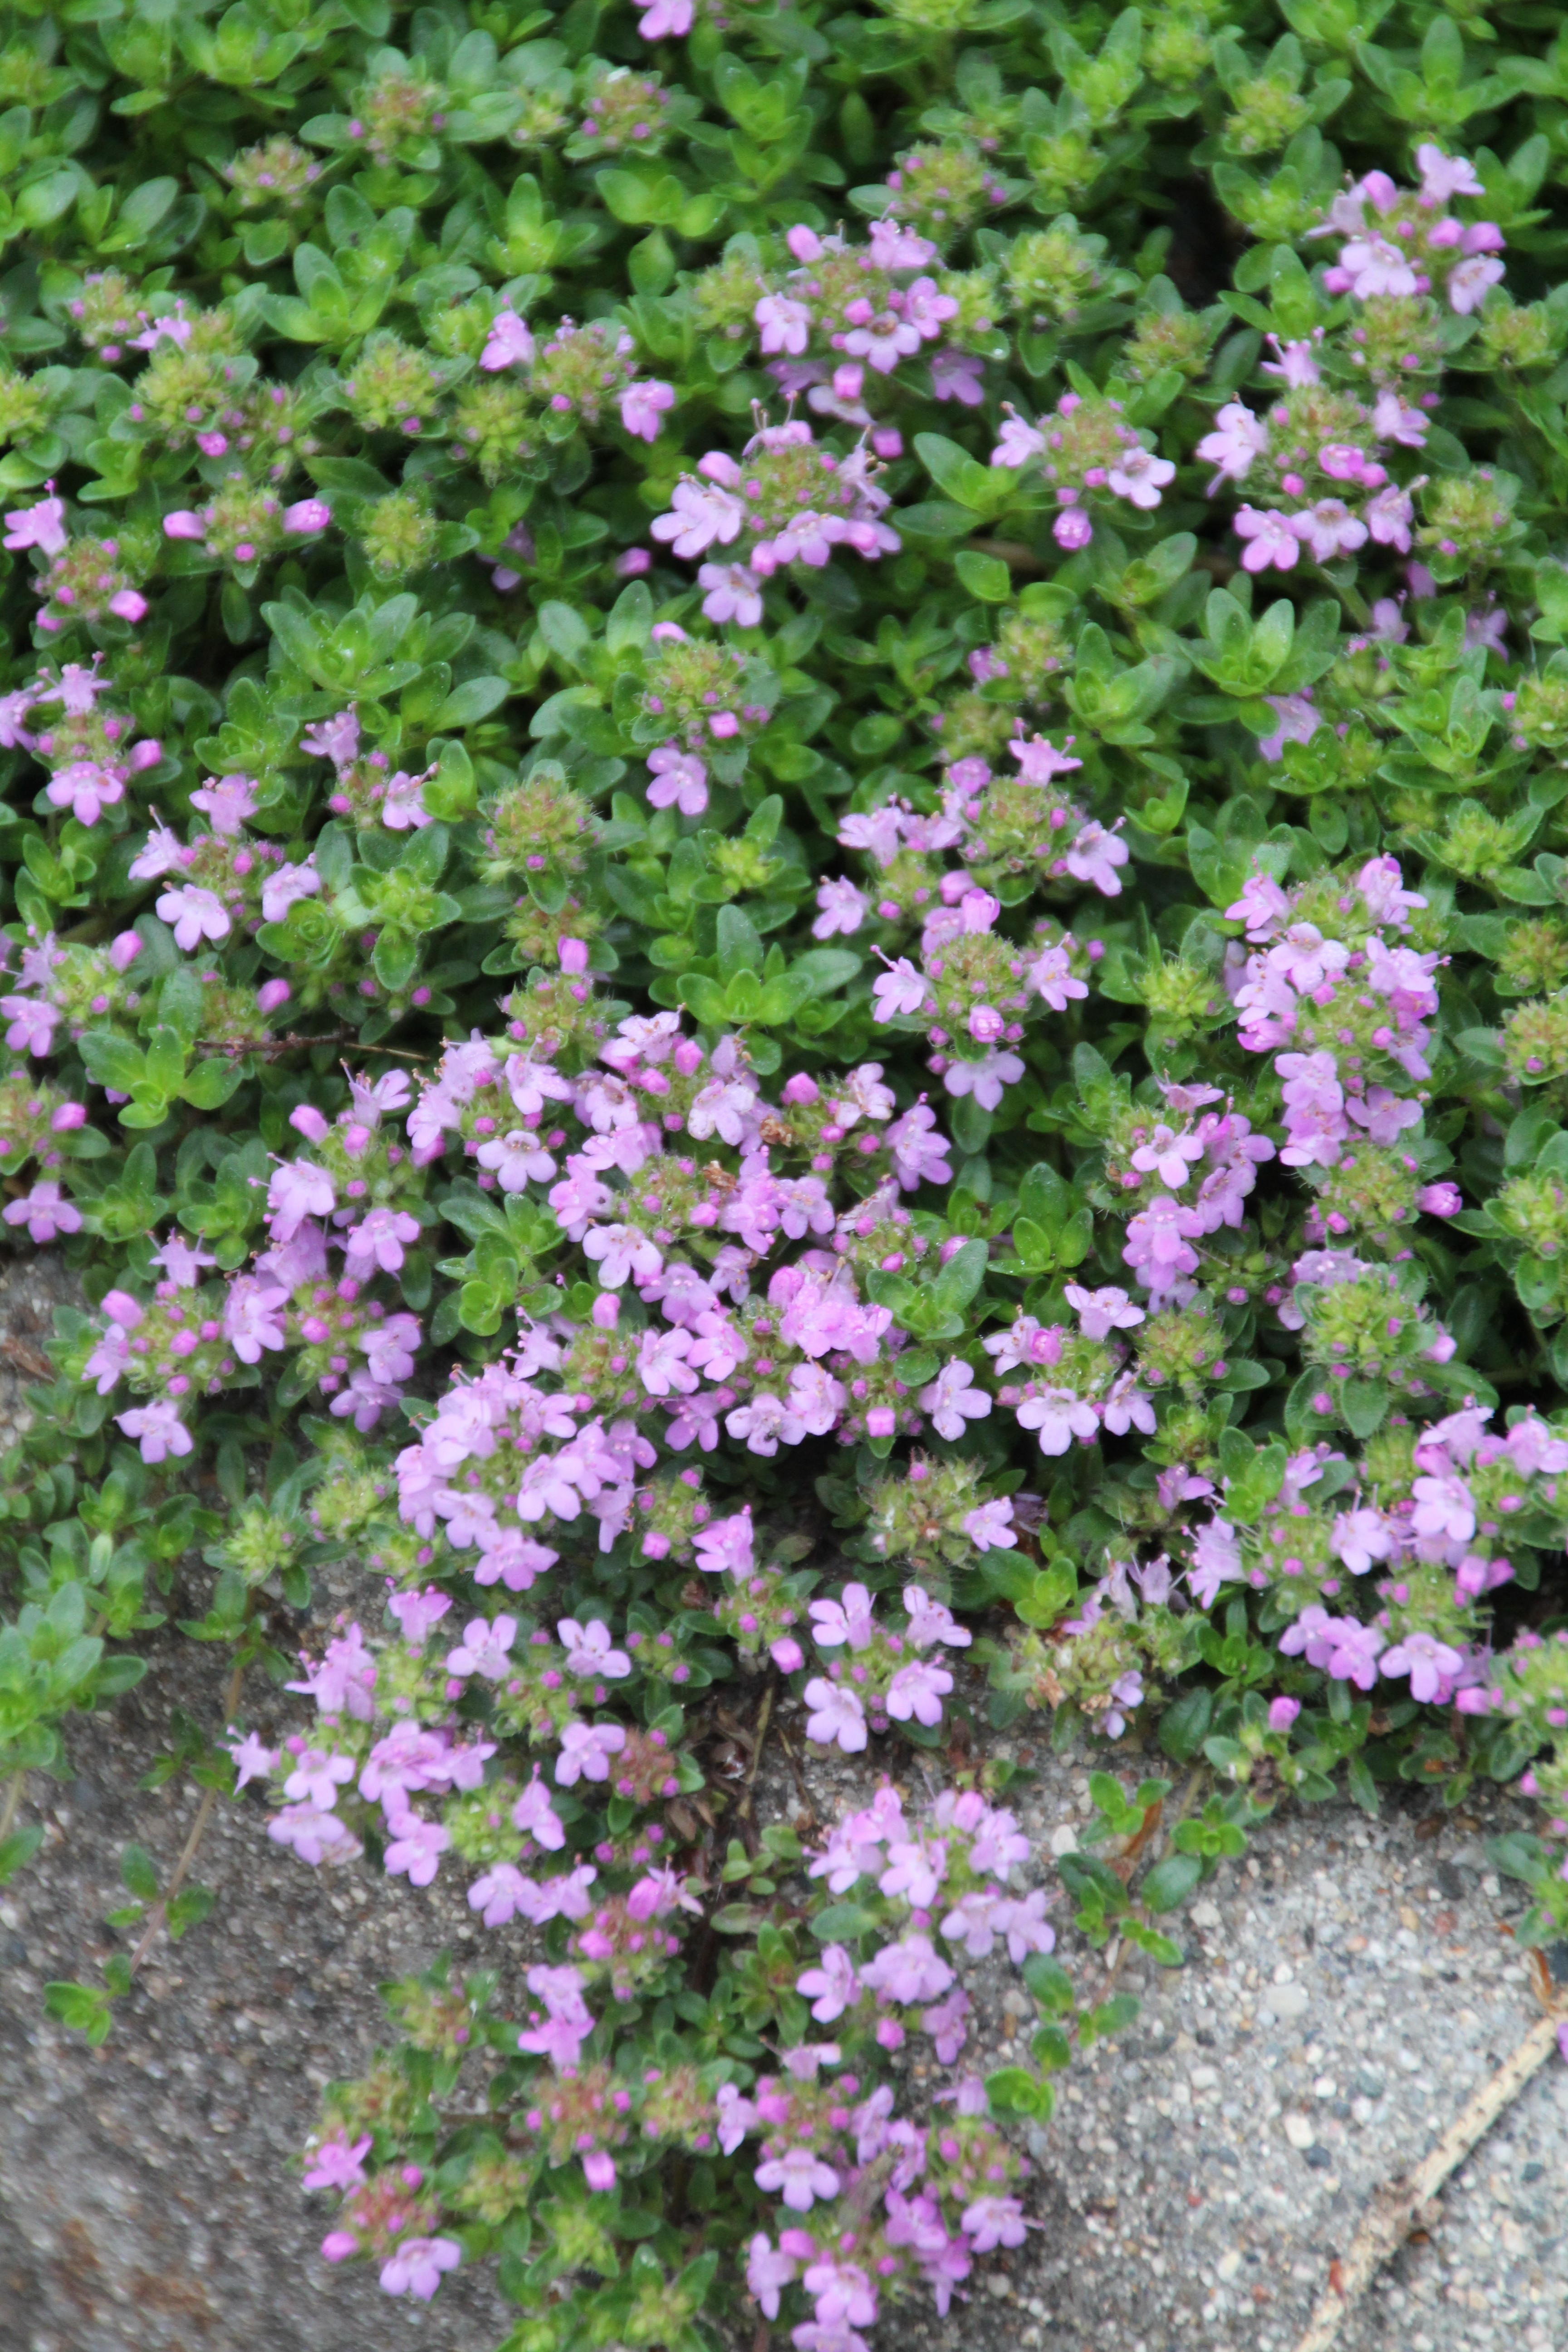 Cluster of small, pink and white flowers throughout a sprawling, green plant